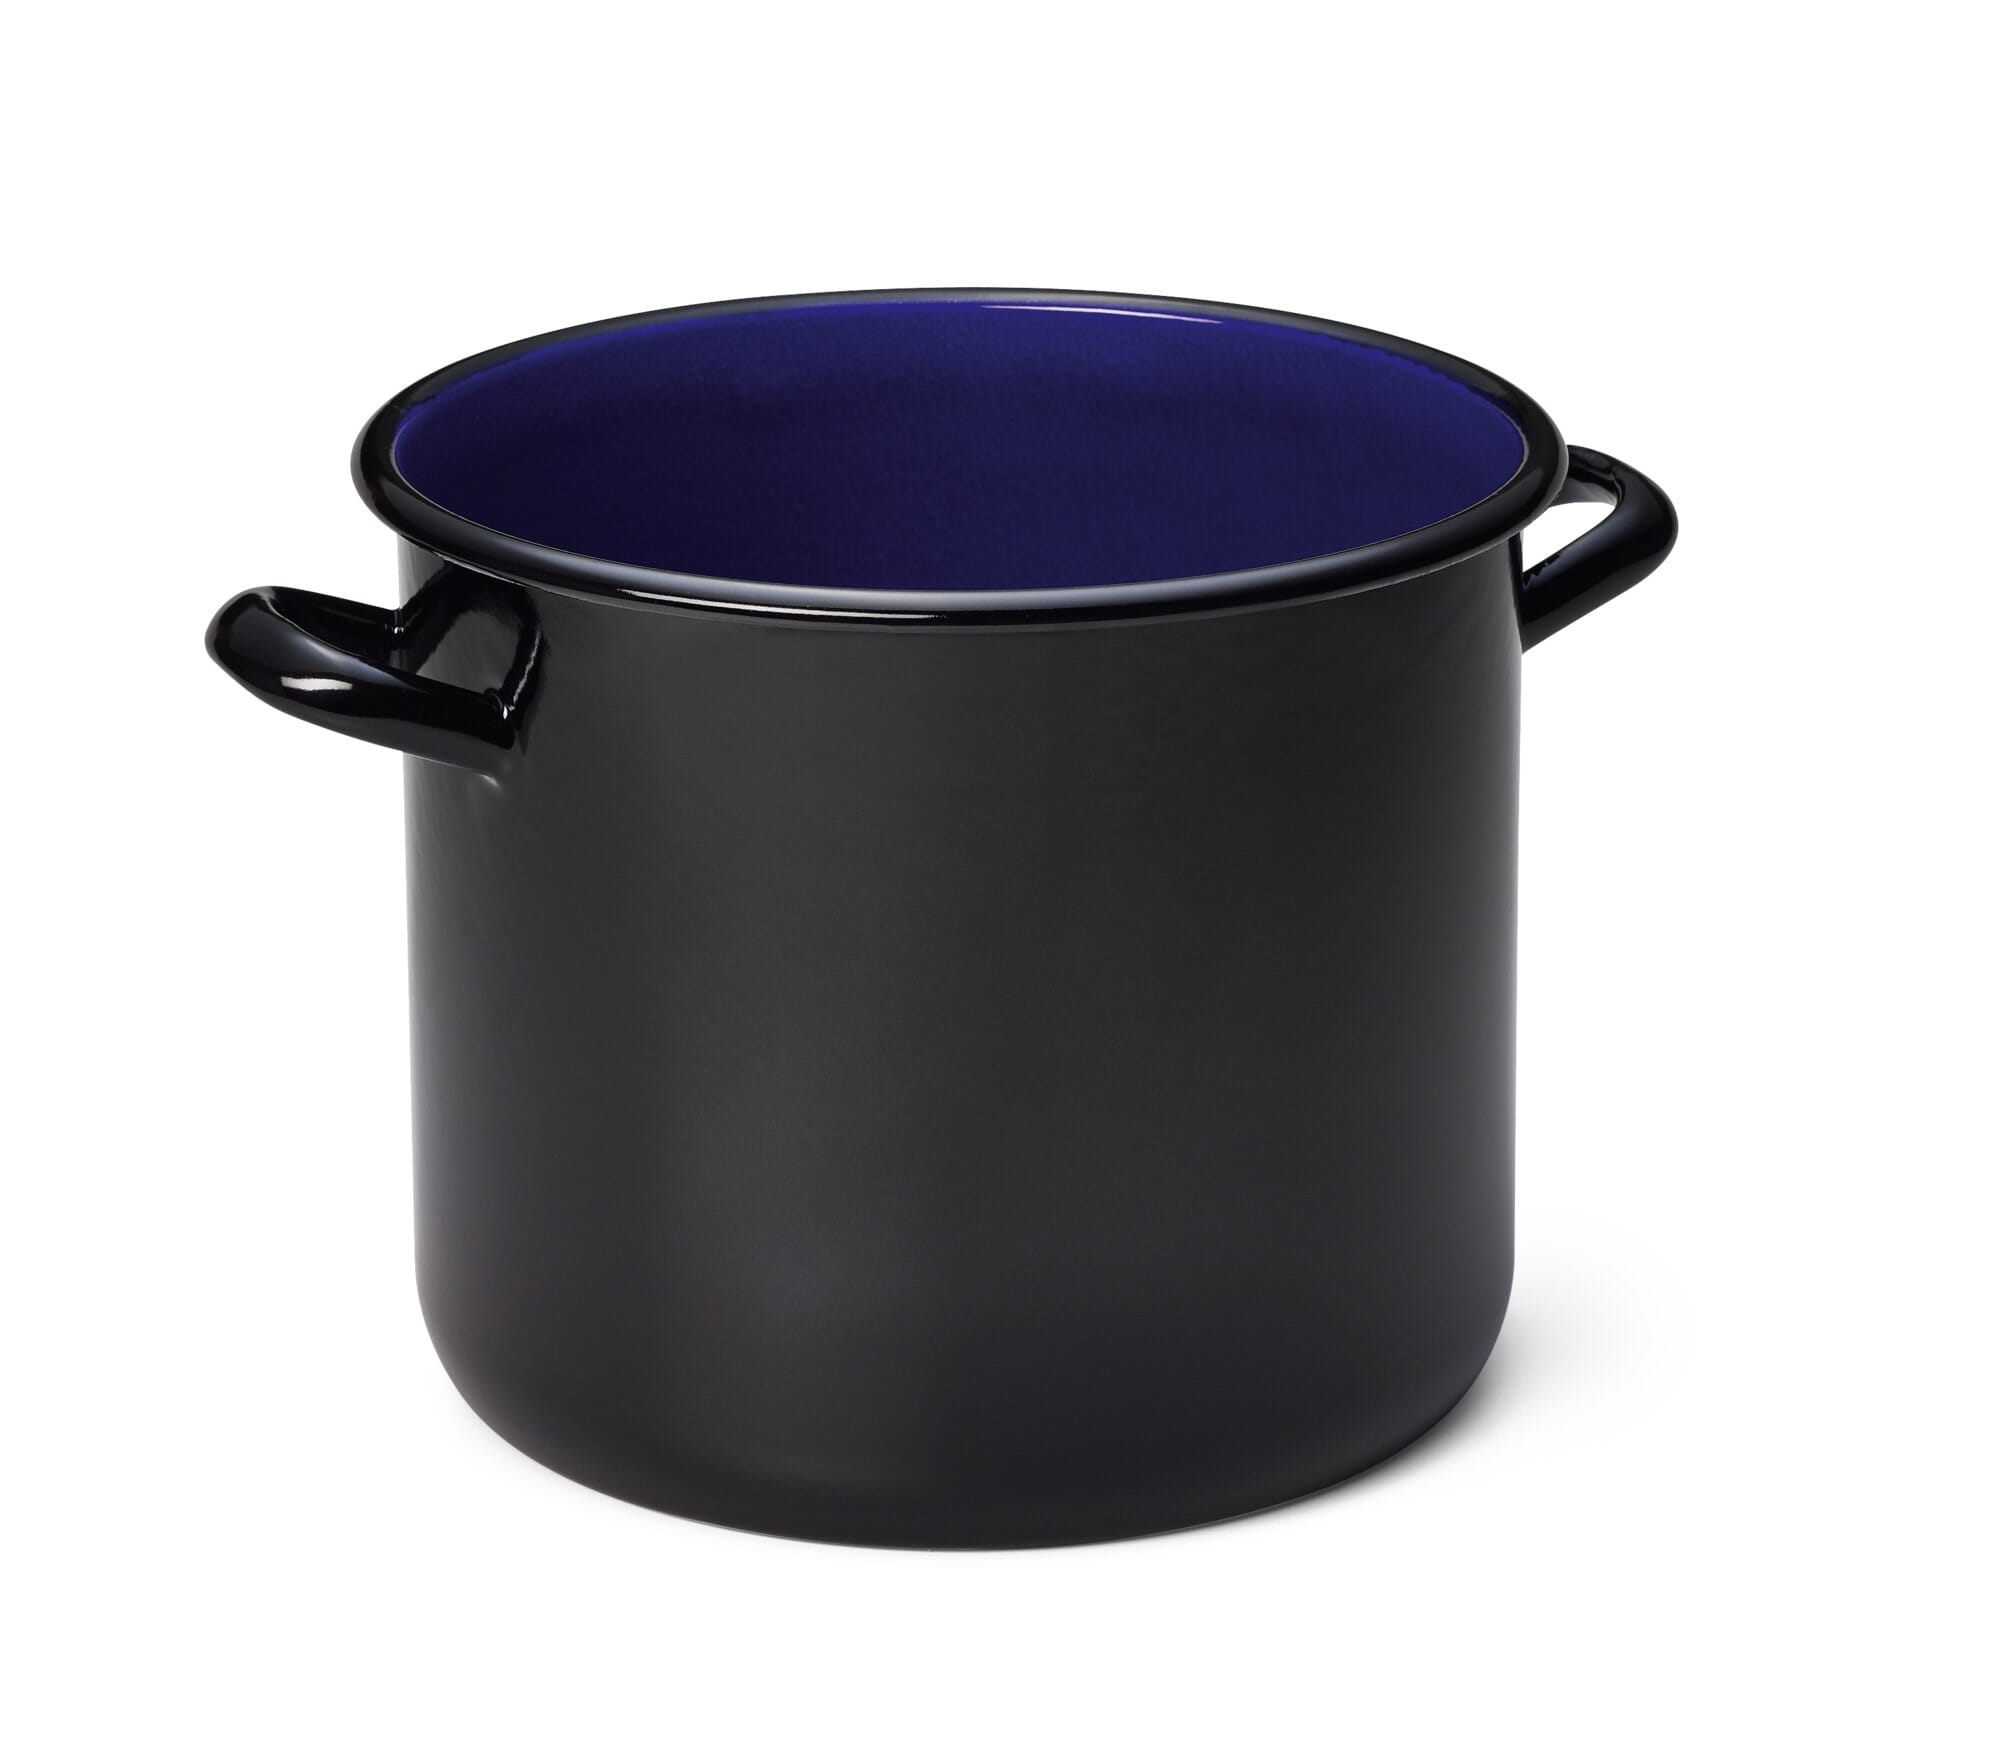 zoon Prelude pijpleiding Riess Pot Email, Deel 4 l | Manufactum